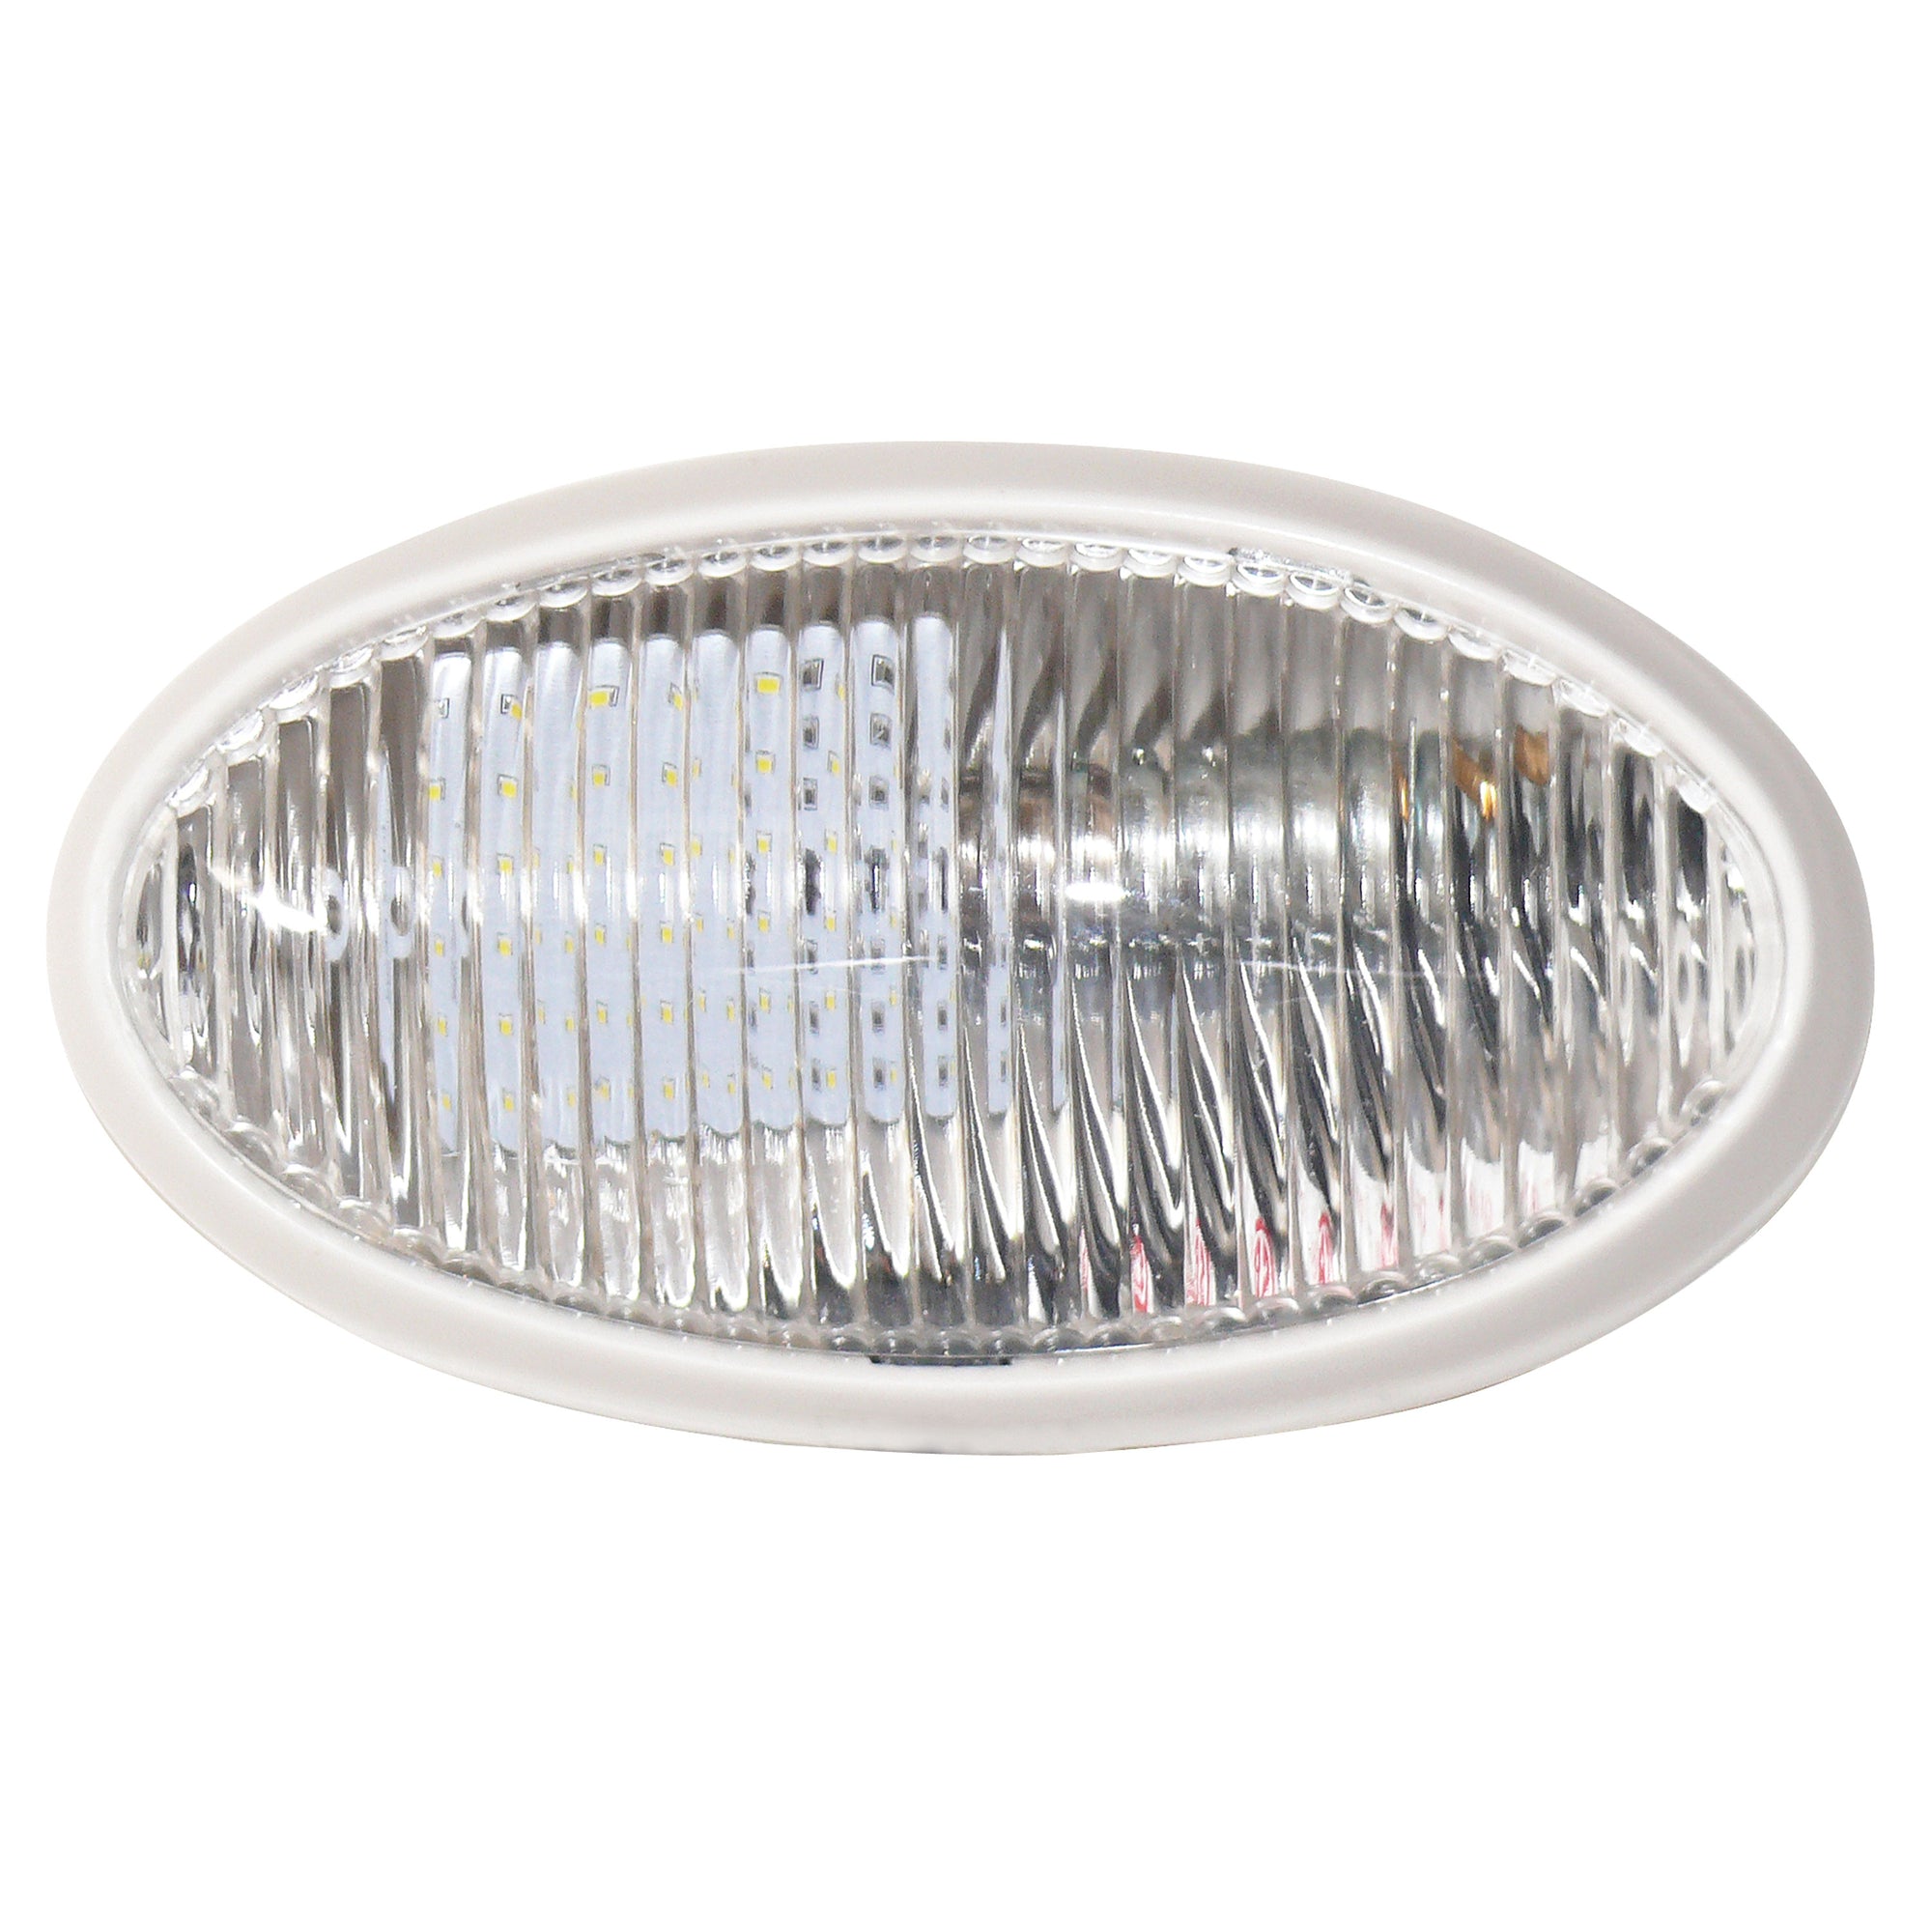 Diamond Group by Valterra DG52731VP Utility/Porch Light with No Switch - 6", White, Oval